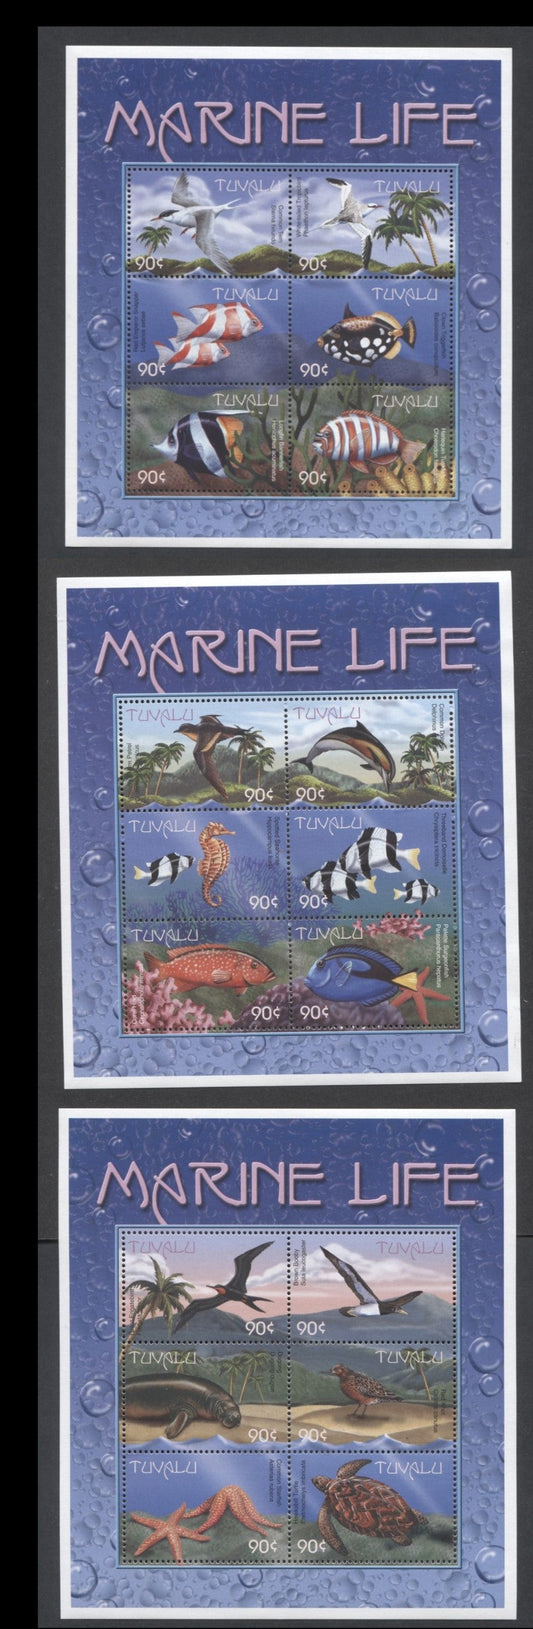 Lot 66 Tuvalu SC#818-820 2000 Marine Life & Birds Issues, 3 VFNH Souvenir Sheets, Click on Listing to See ALL Pictures, 2017 Scott Cat. $22.5